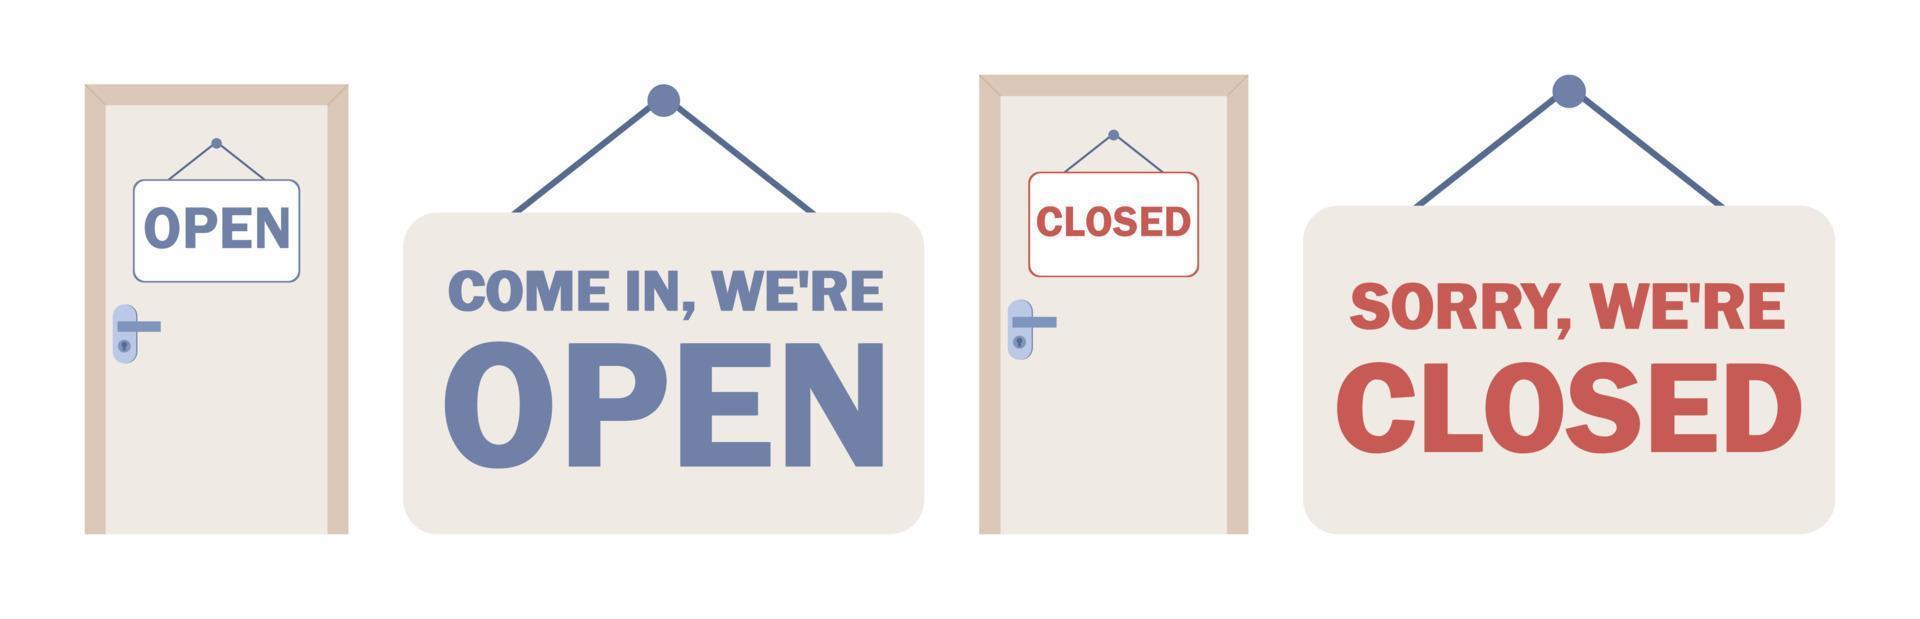 Open and closed door sign. Vector flat illustration